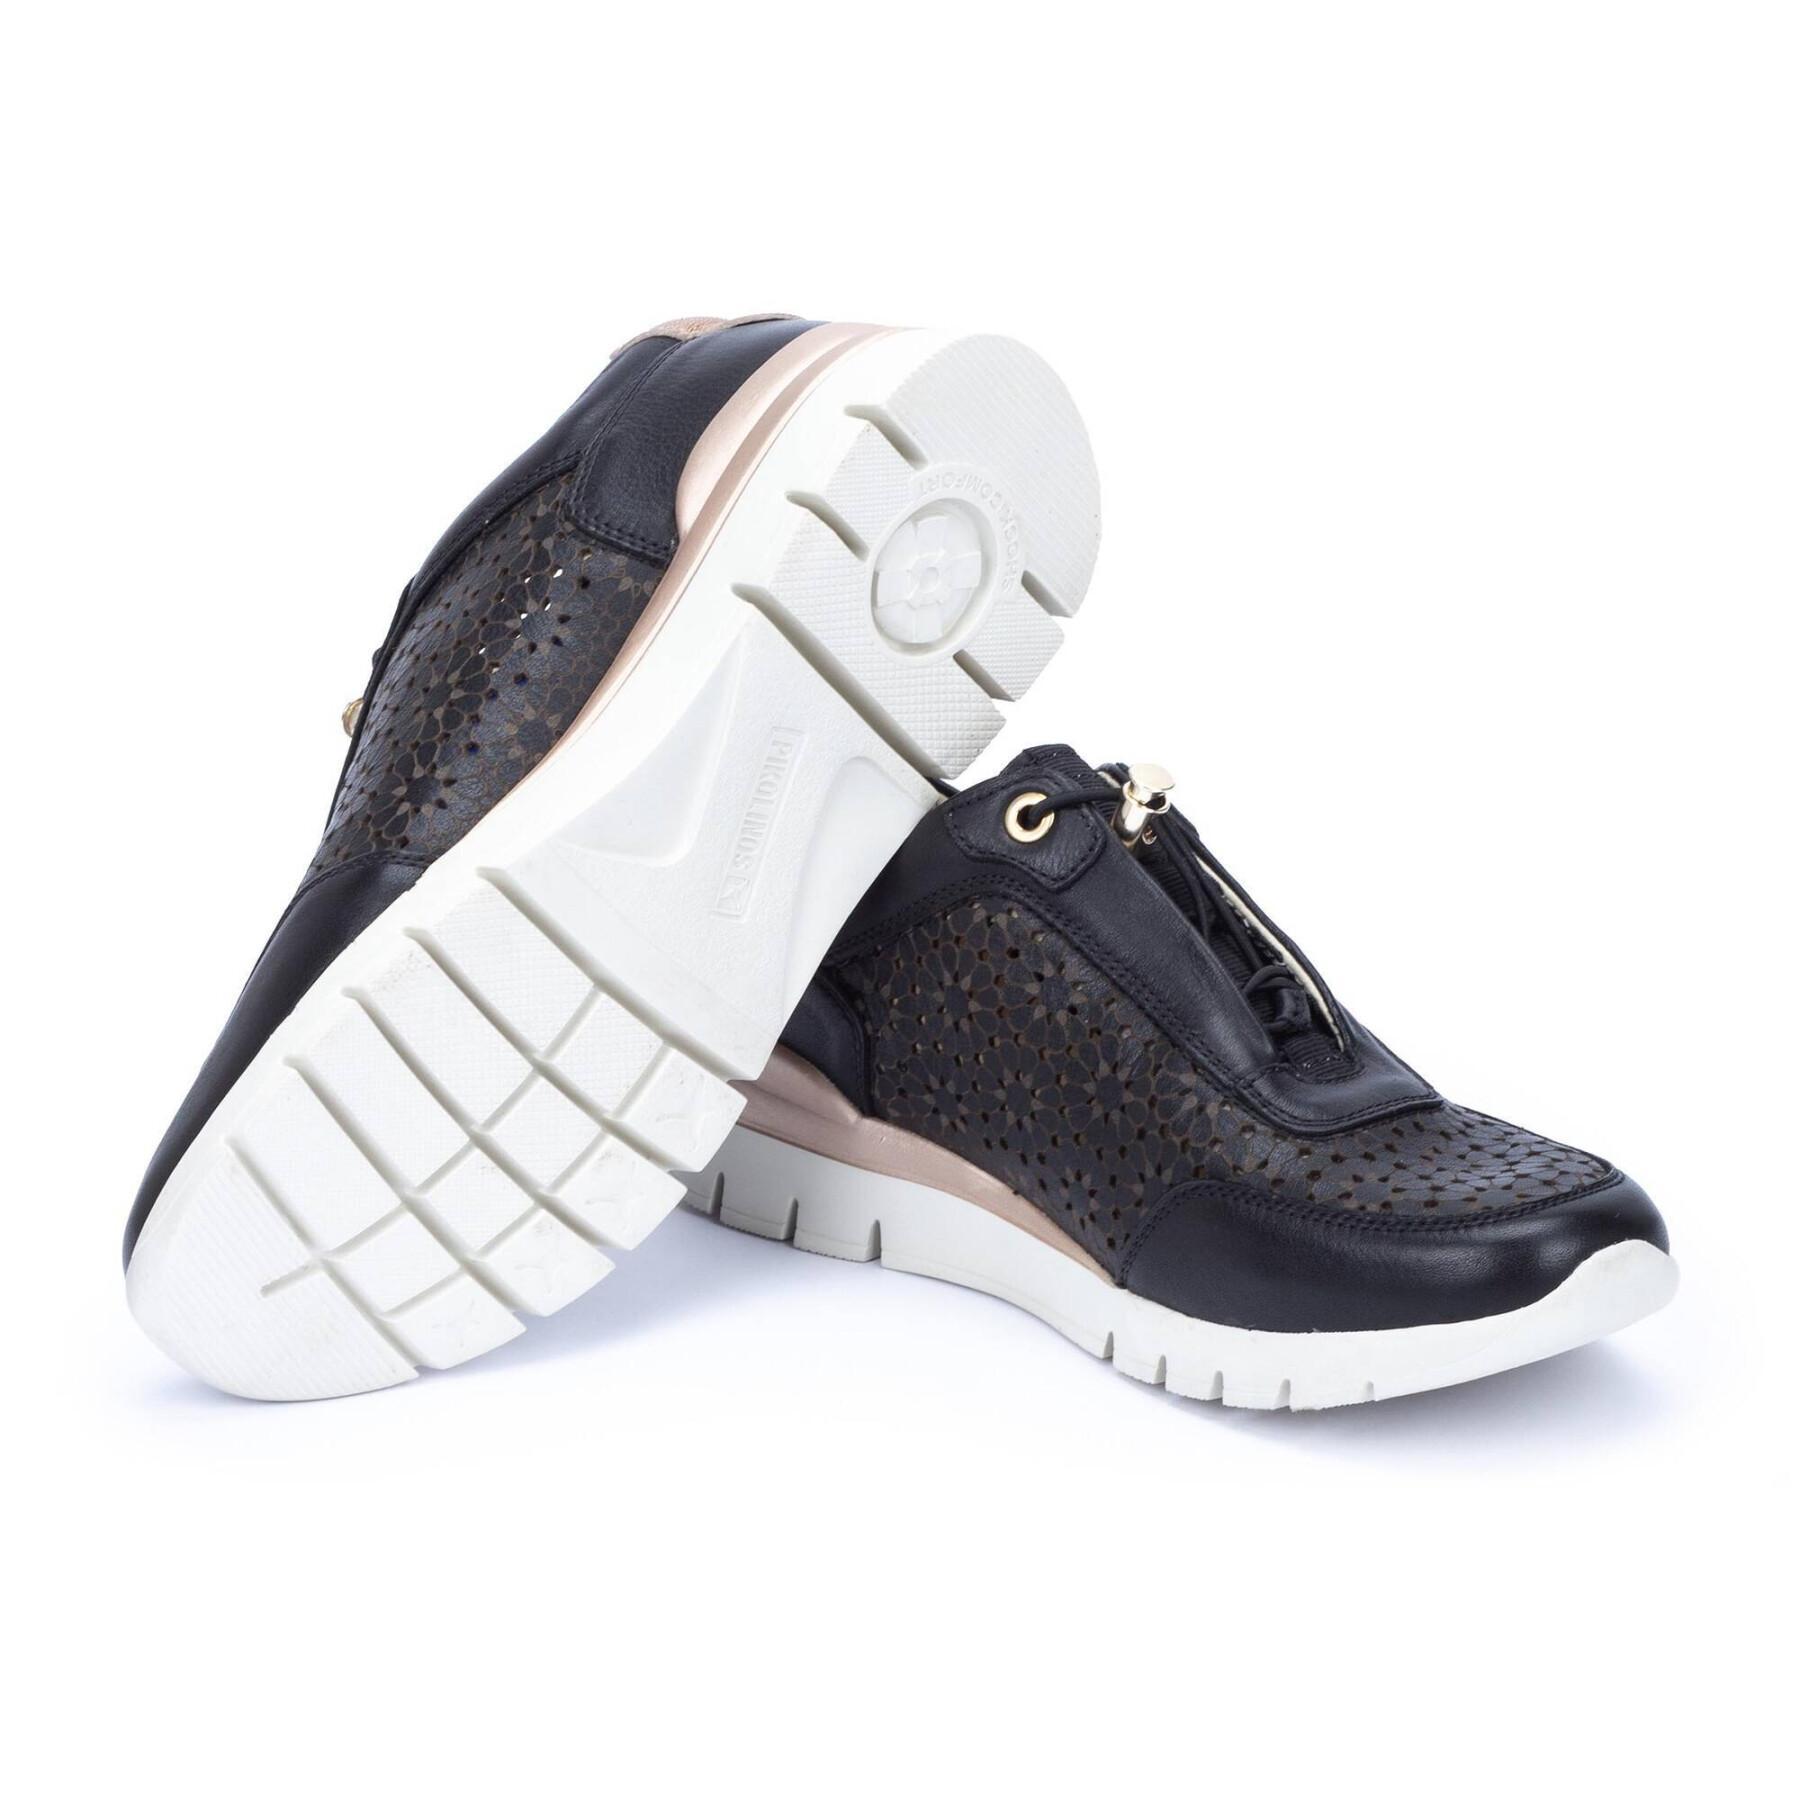 Women's sneakers Pikolinos Cantabria W4R-6584